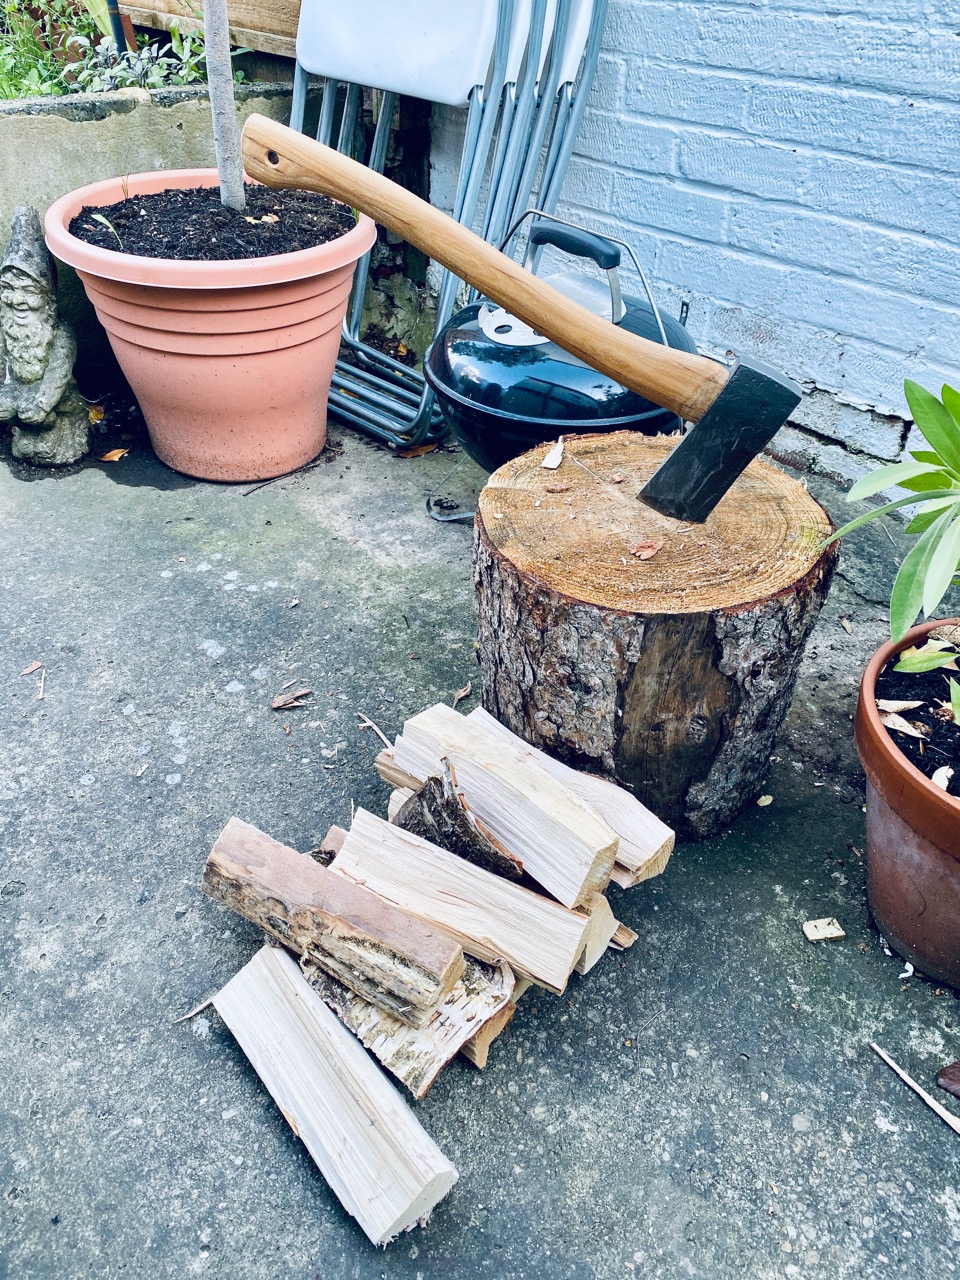 Pile of wood next to a chopping block with an axe in it